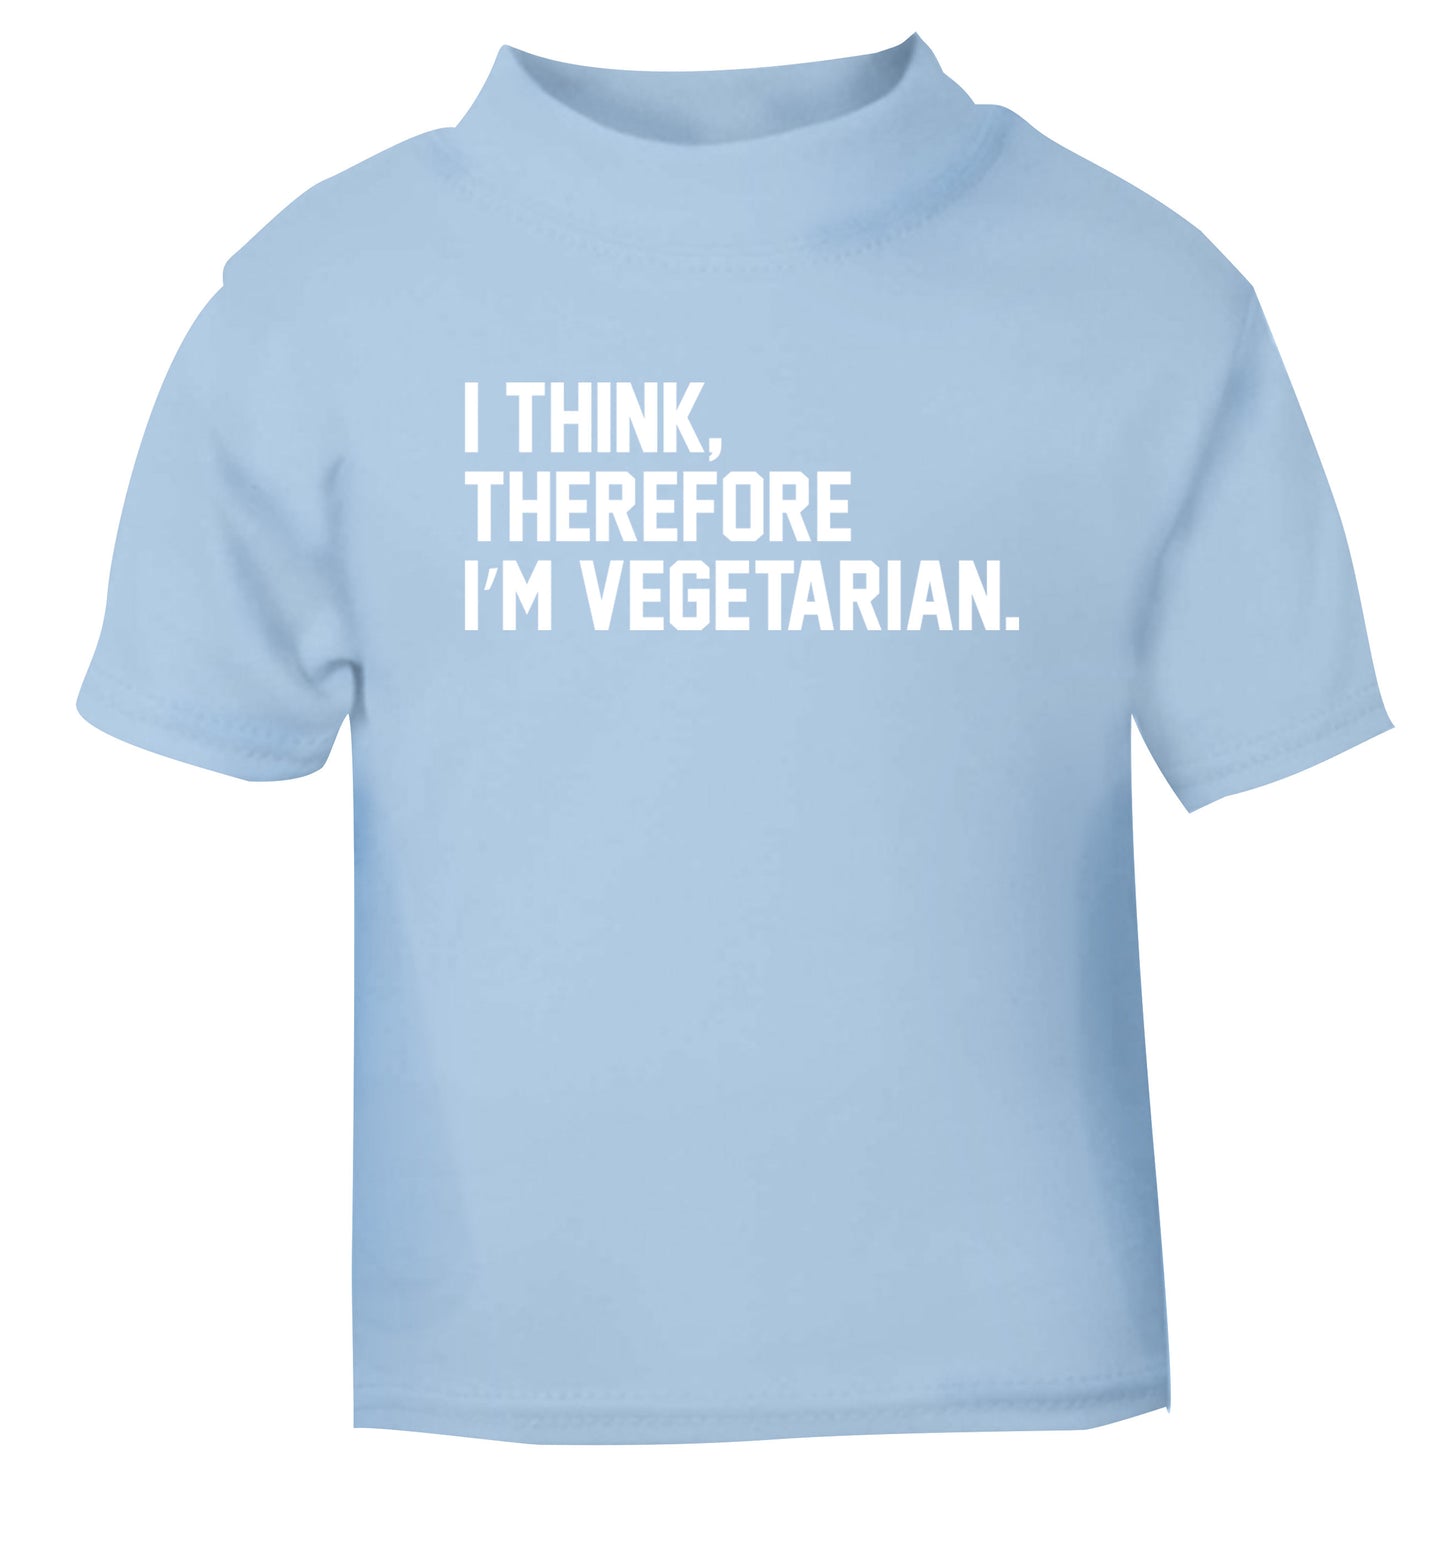 I think therefore I'm vegetarian light blue Baby Toddler Tshirt 2 Years